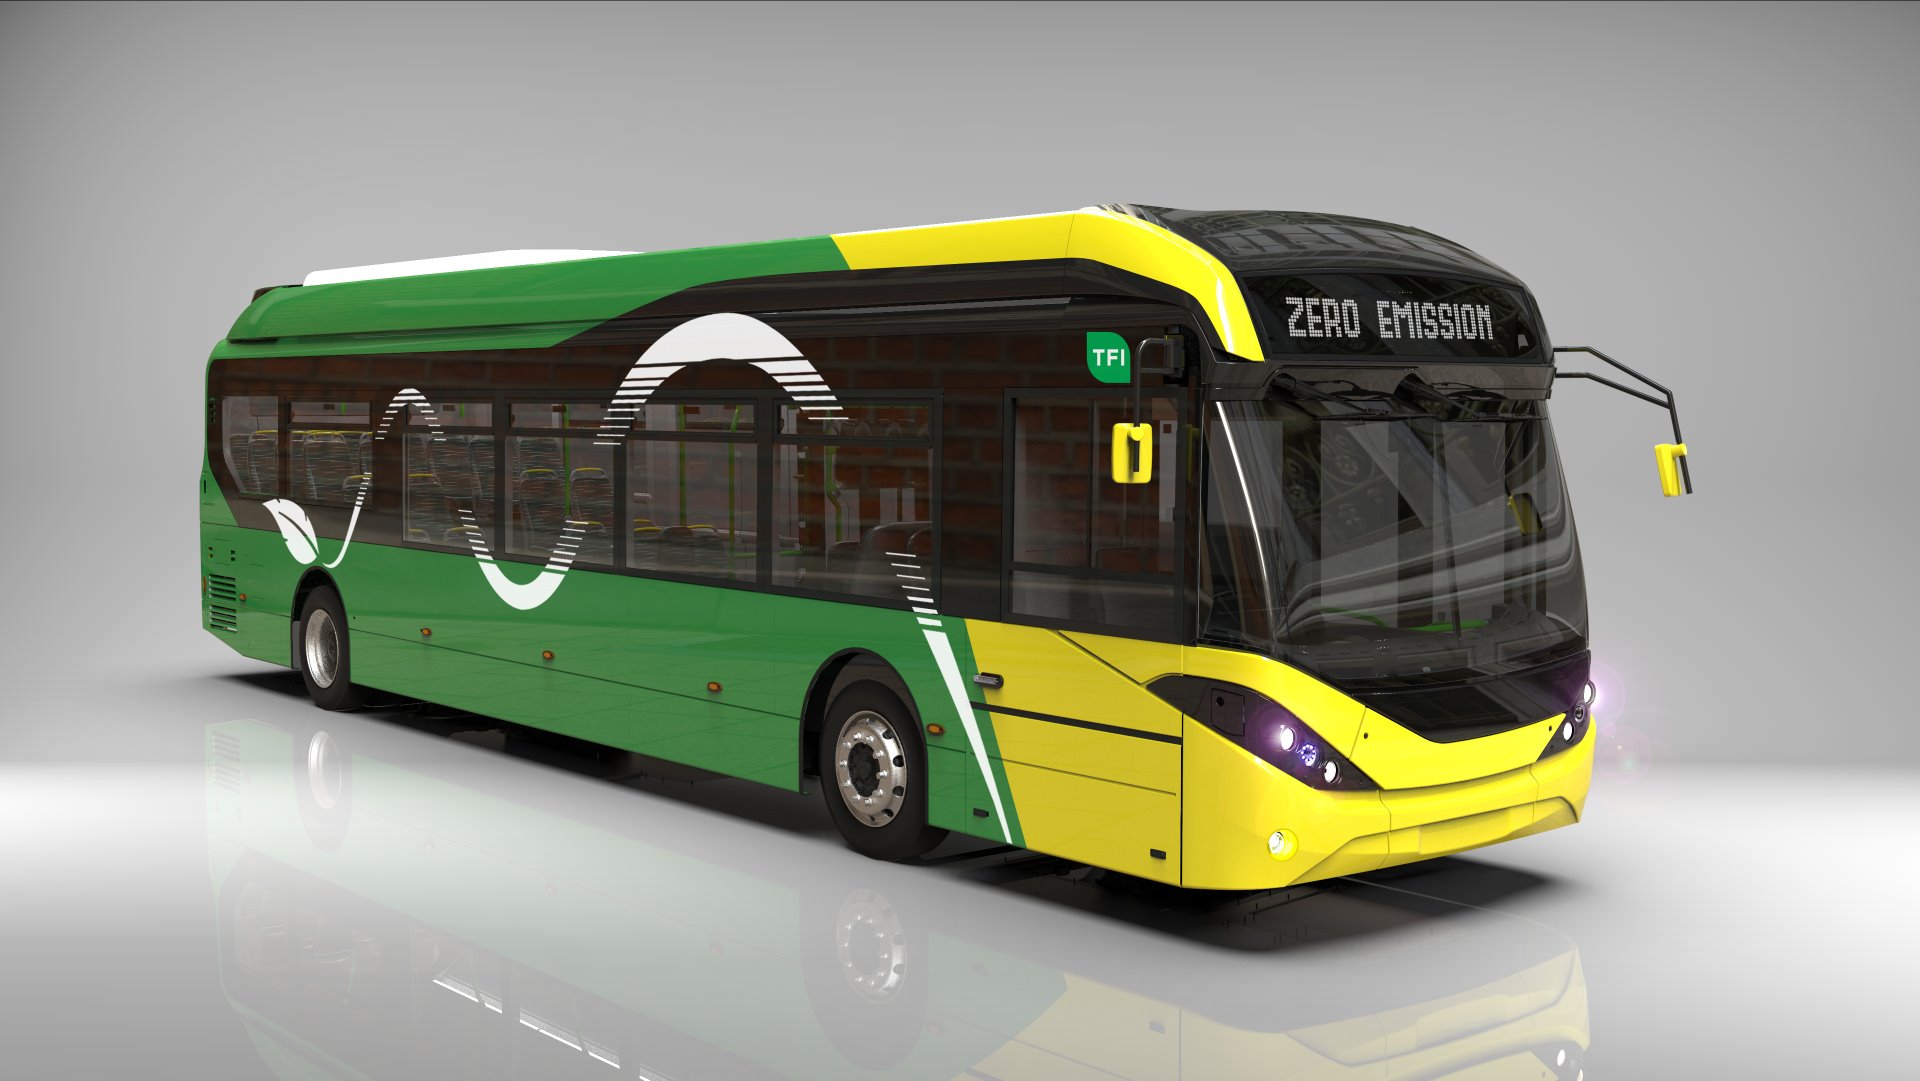 200 electronic buses will arrive in Ireland

